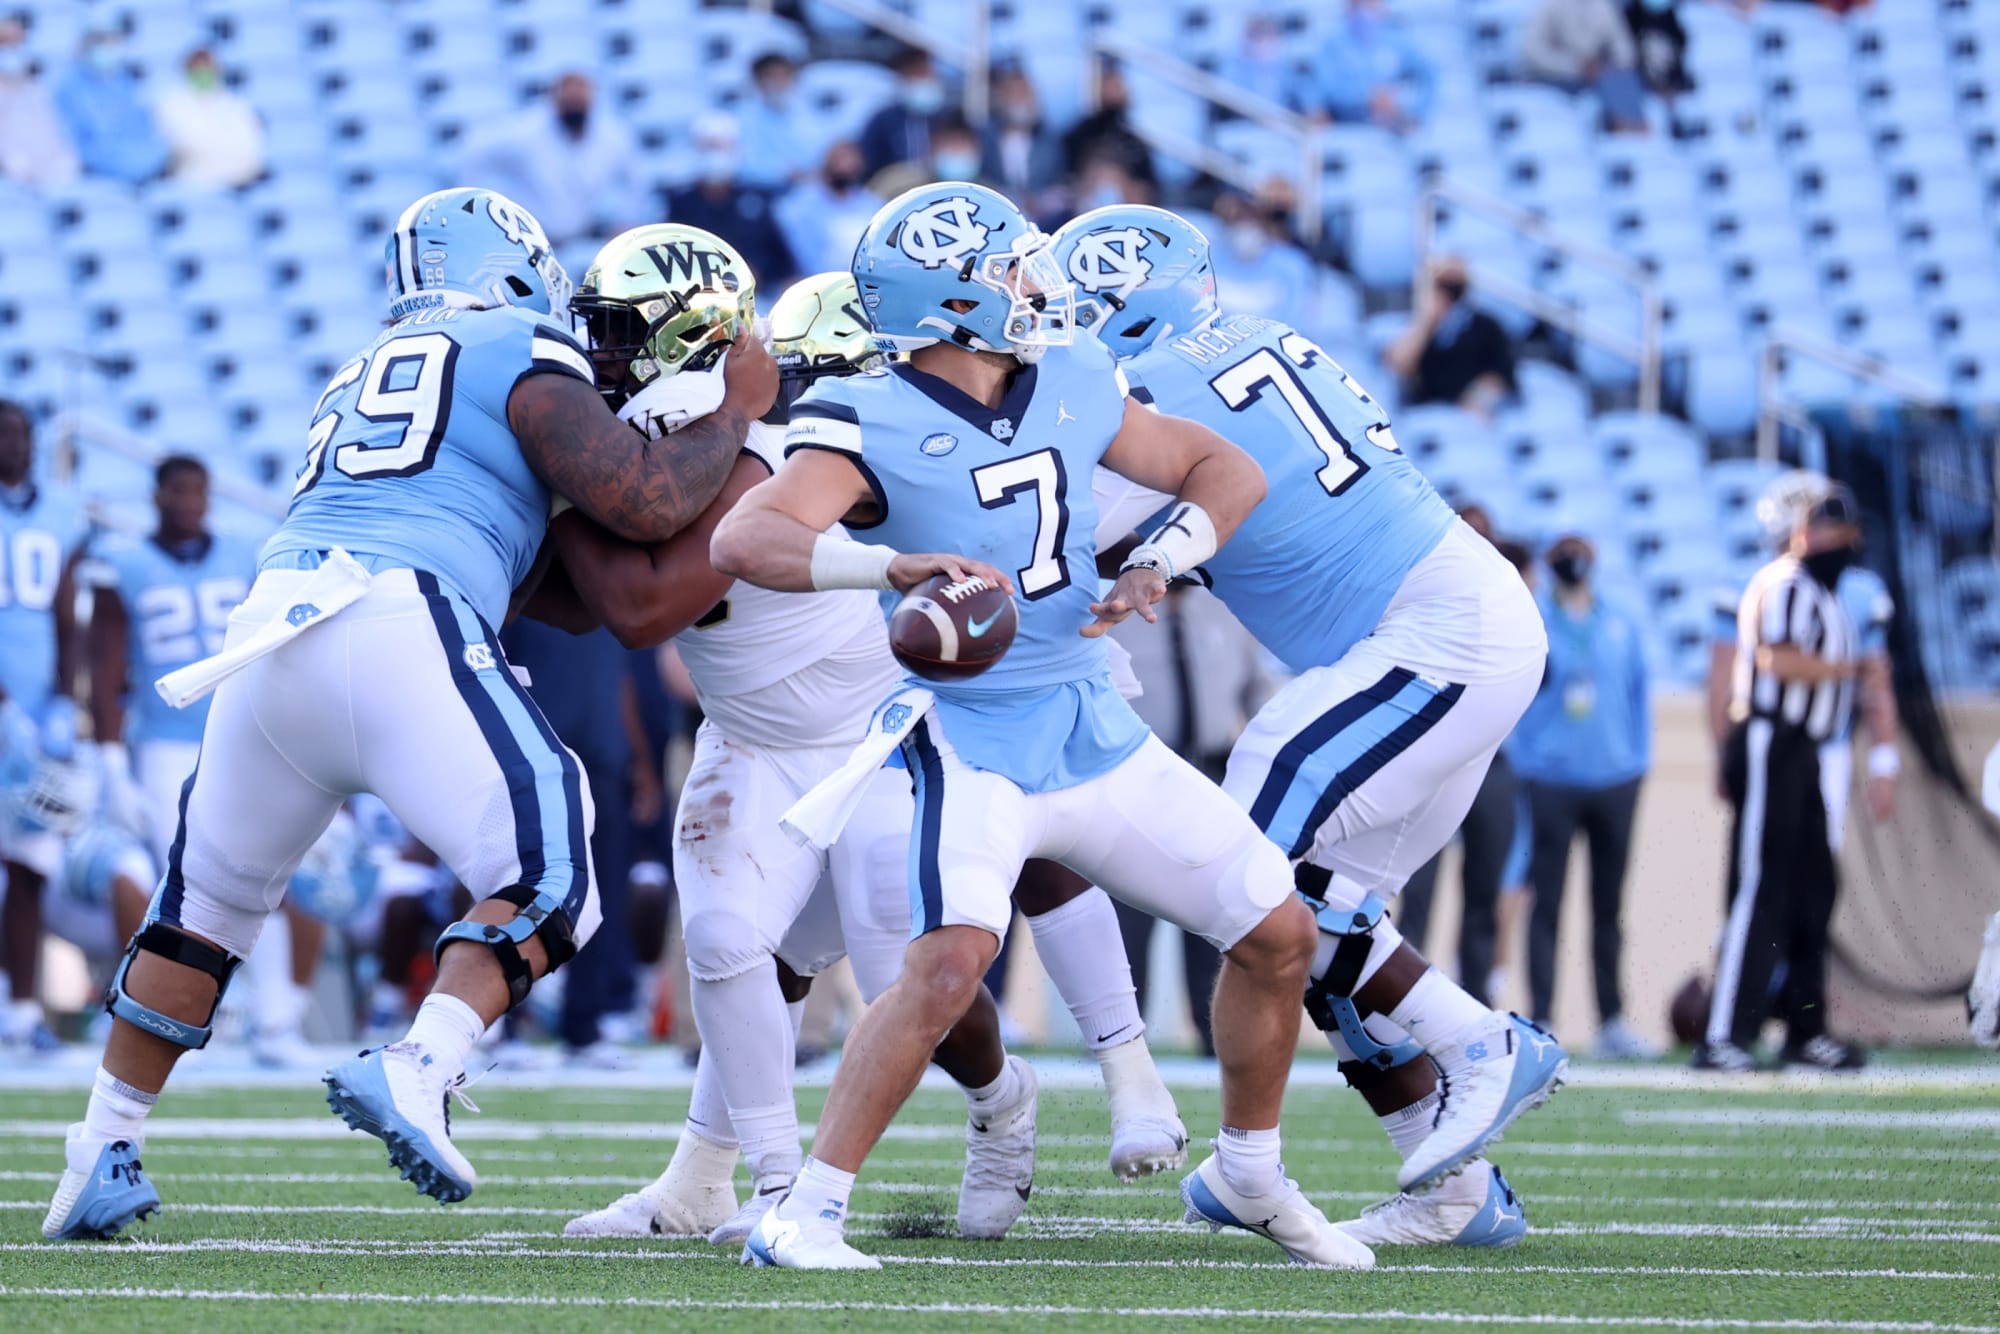 UNC Football vs. Wake Forest Preview, info, prediction and more